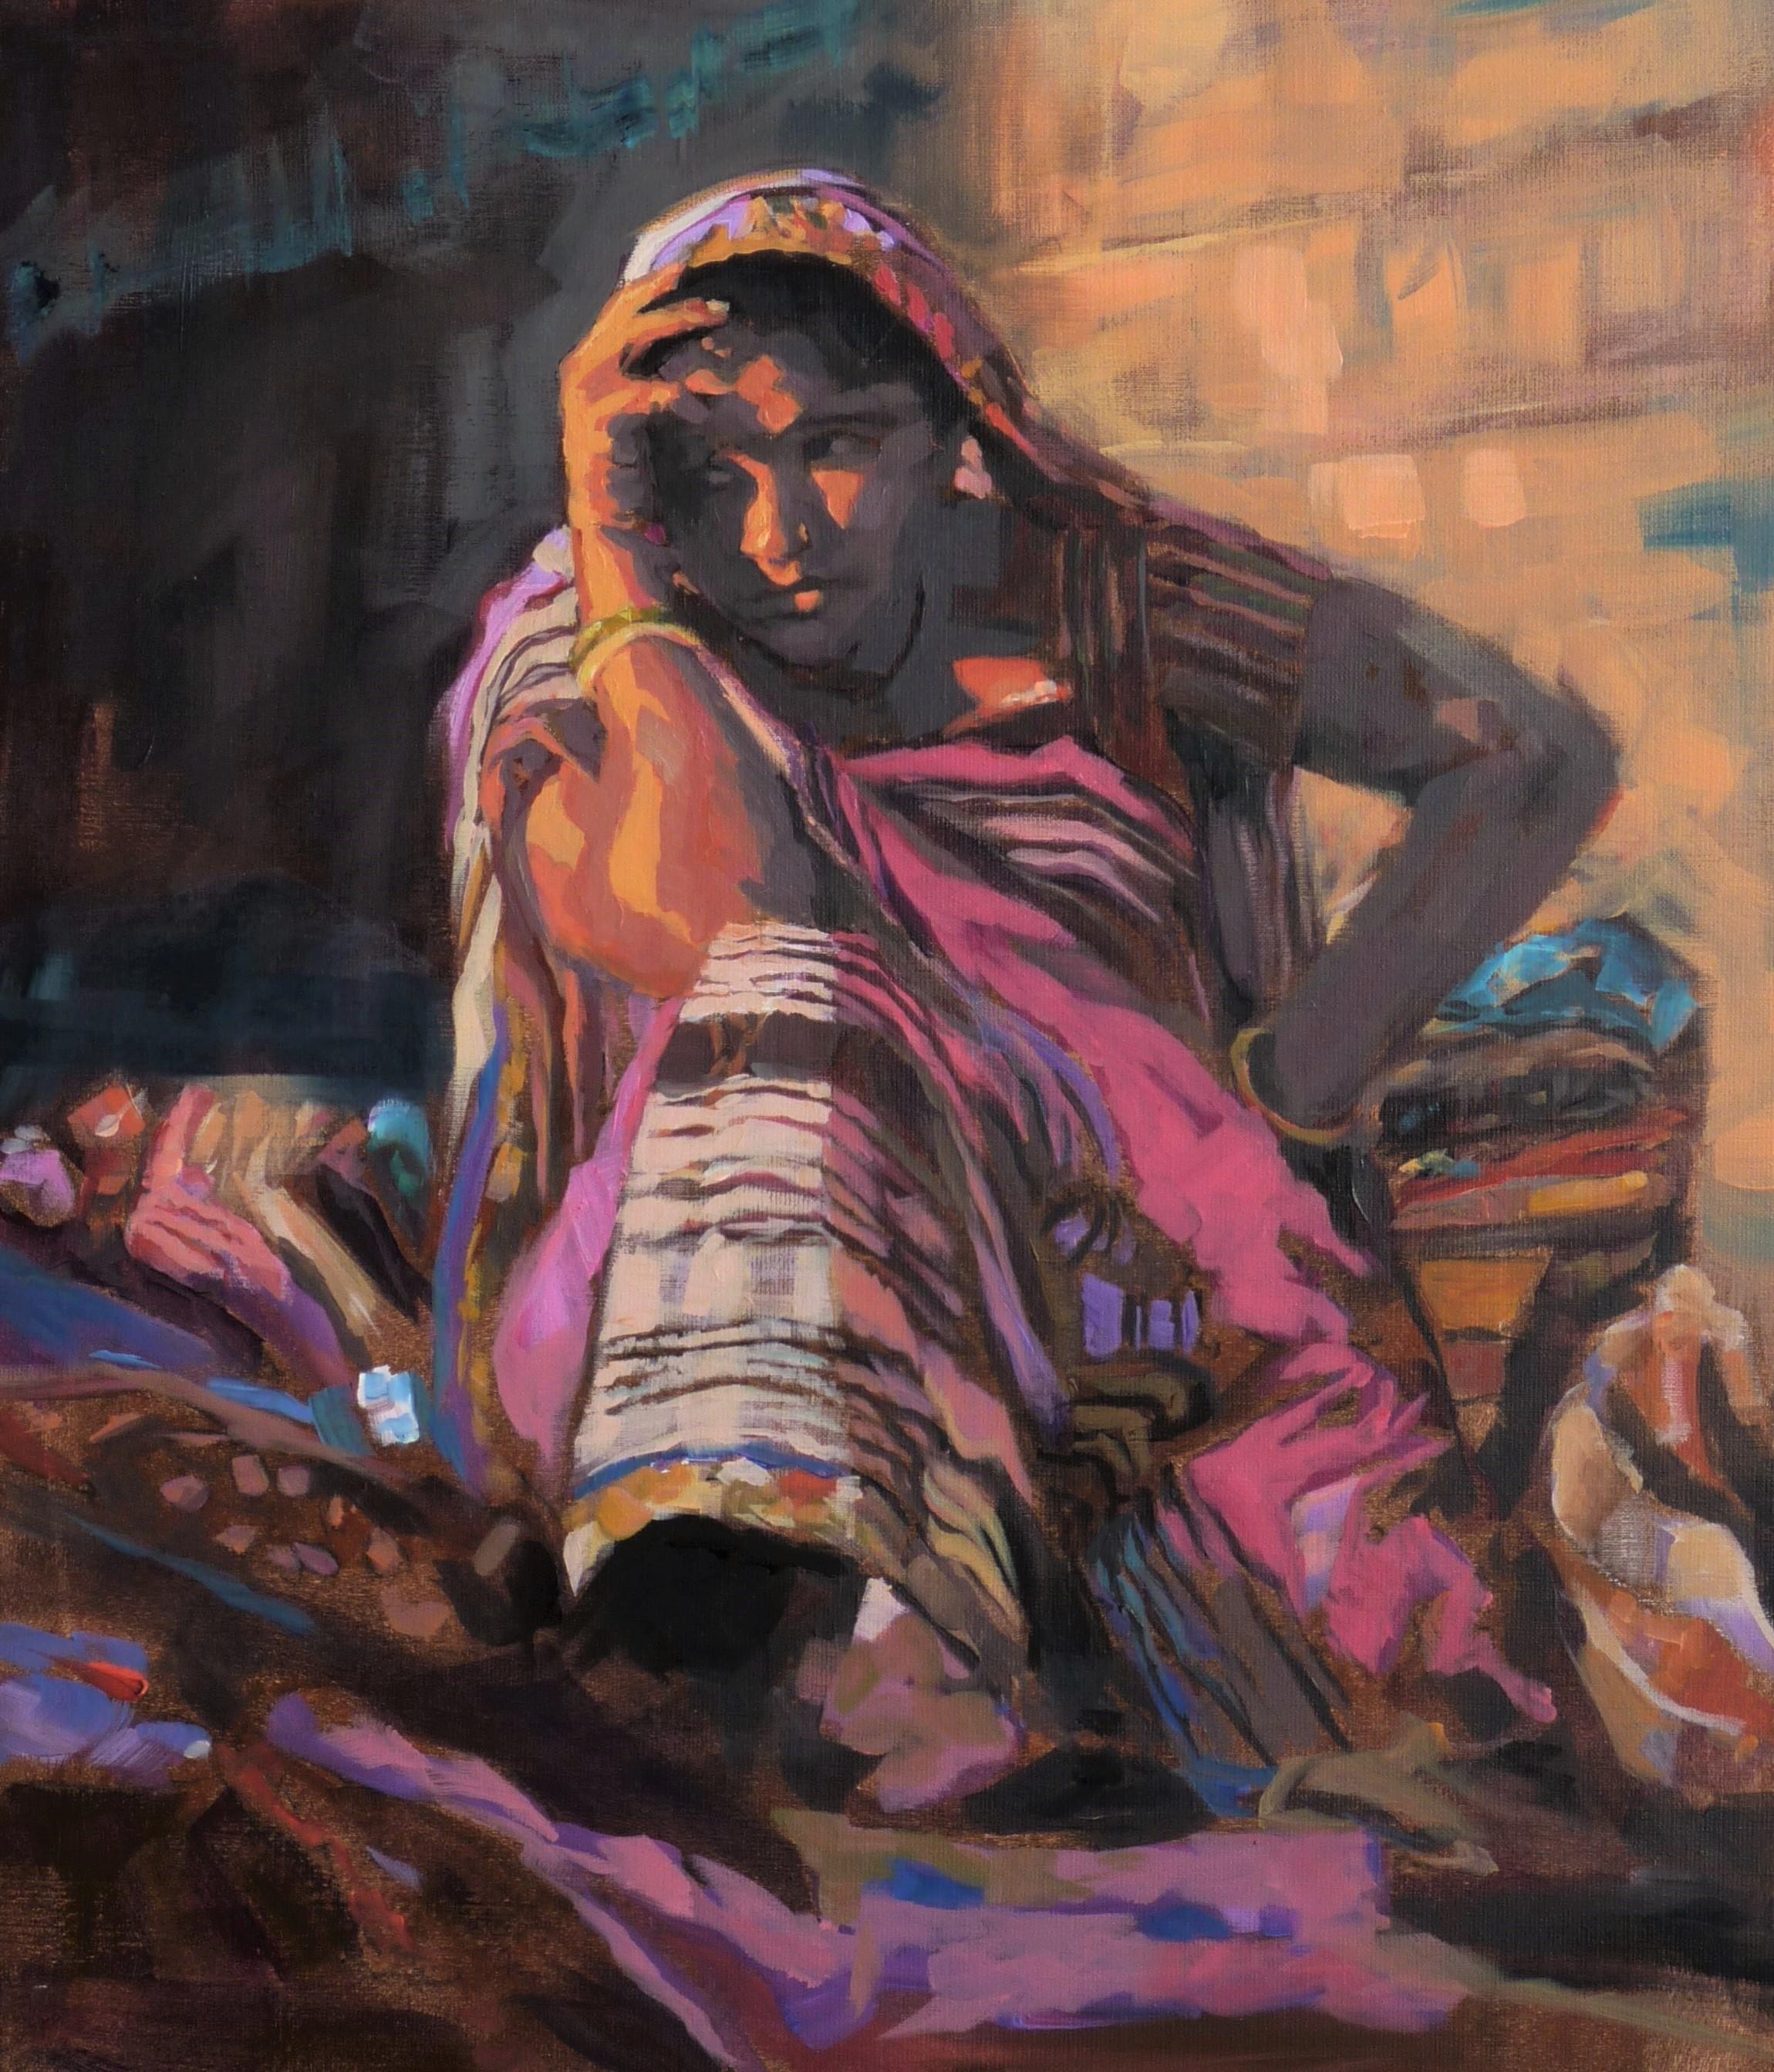 Magenta- 21st Century Painting of a colorful woman in India